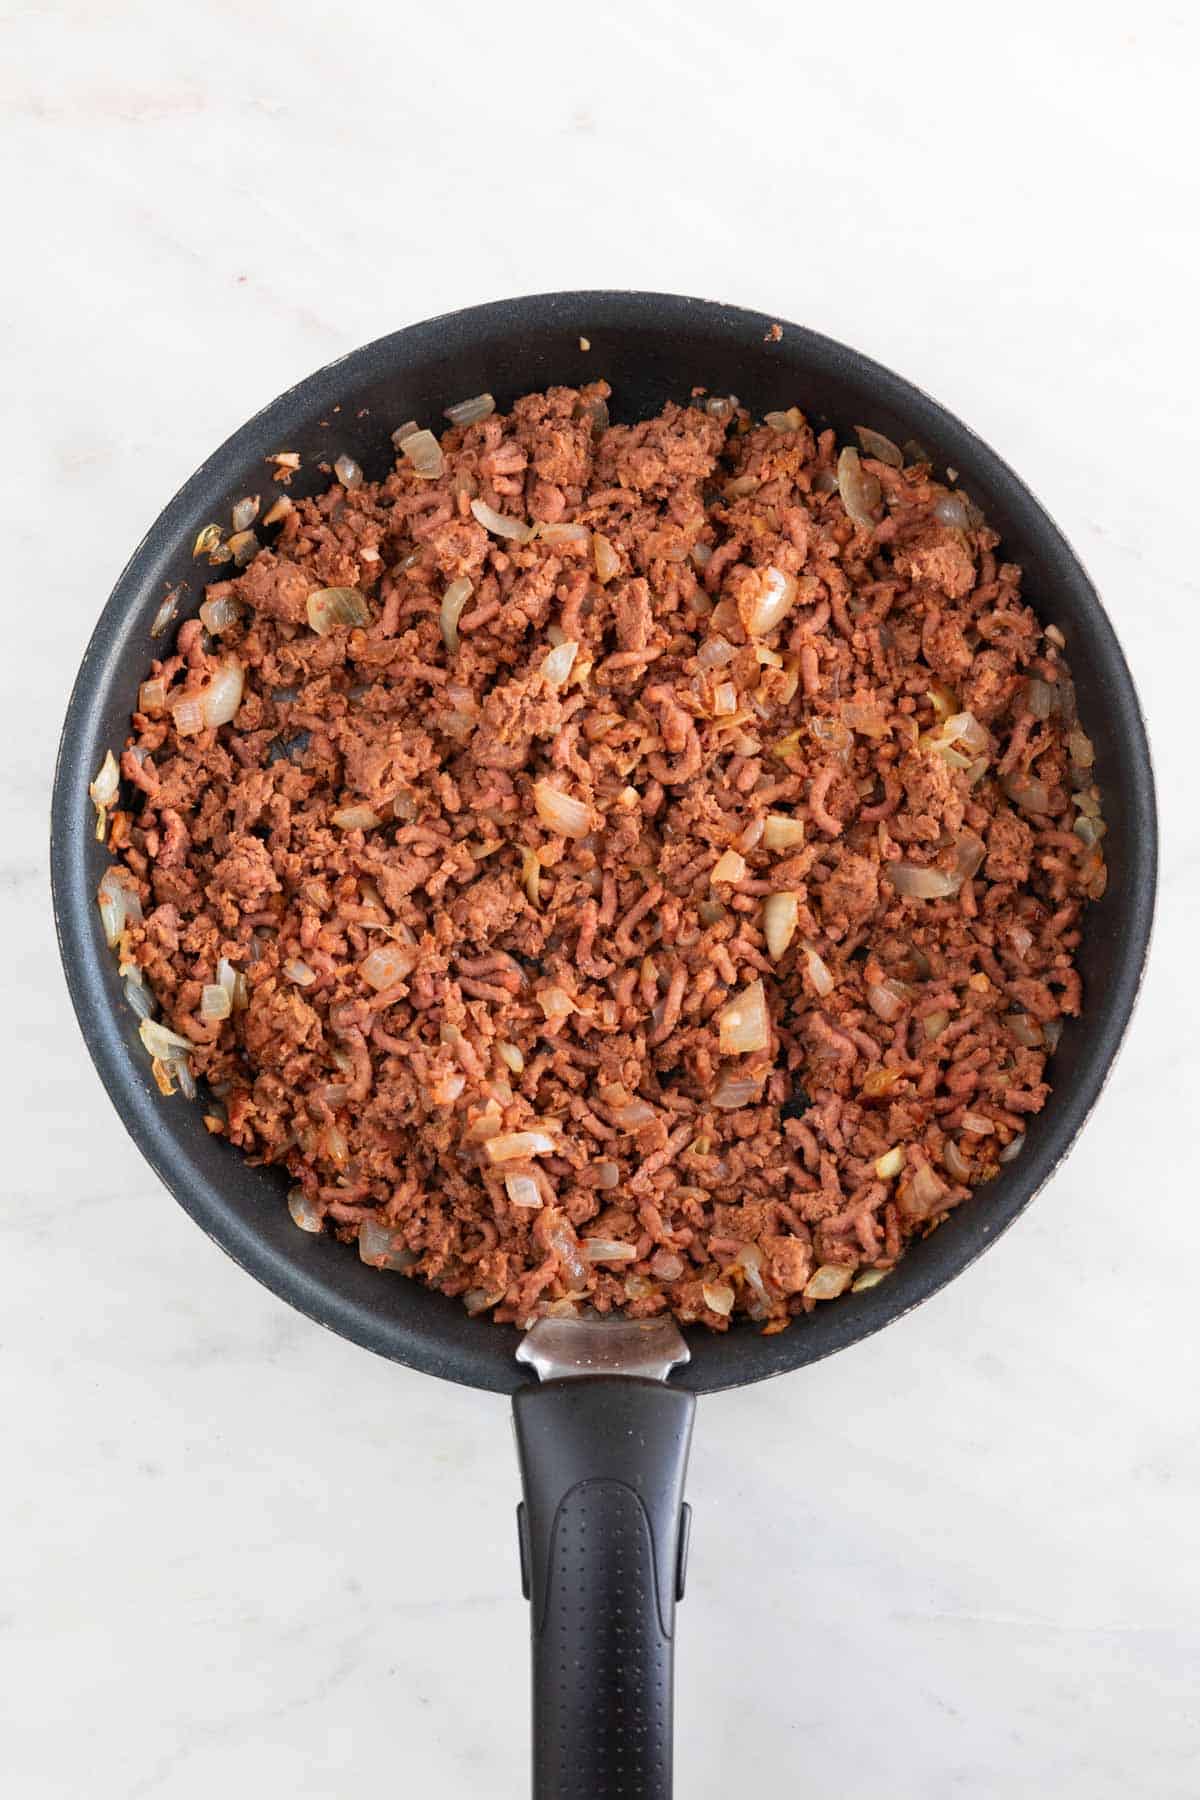 A skillet with cooked onion, garlic, and vegan ground beef.